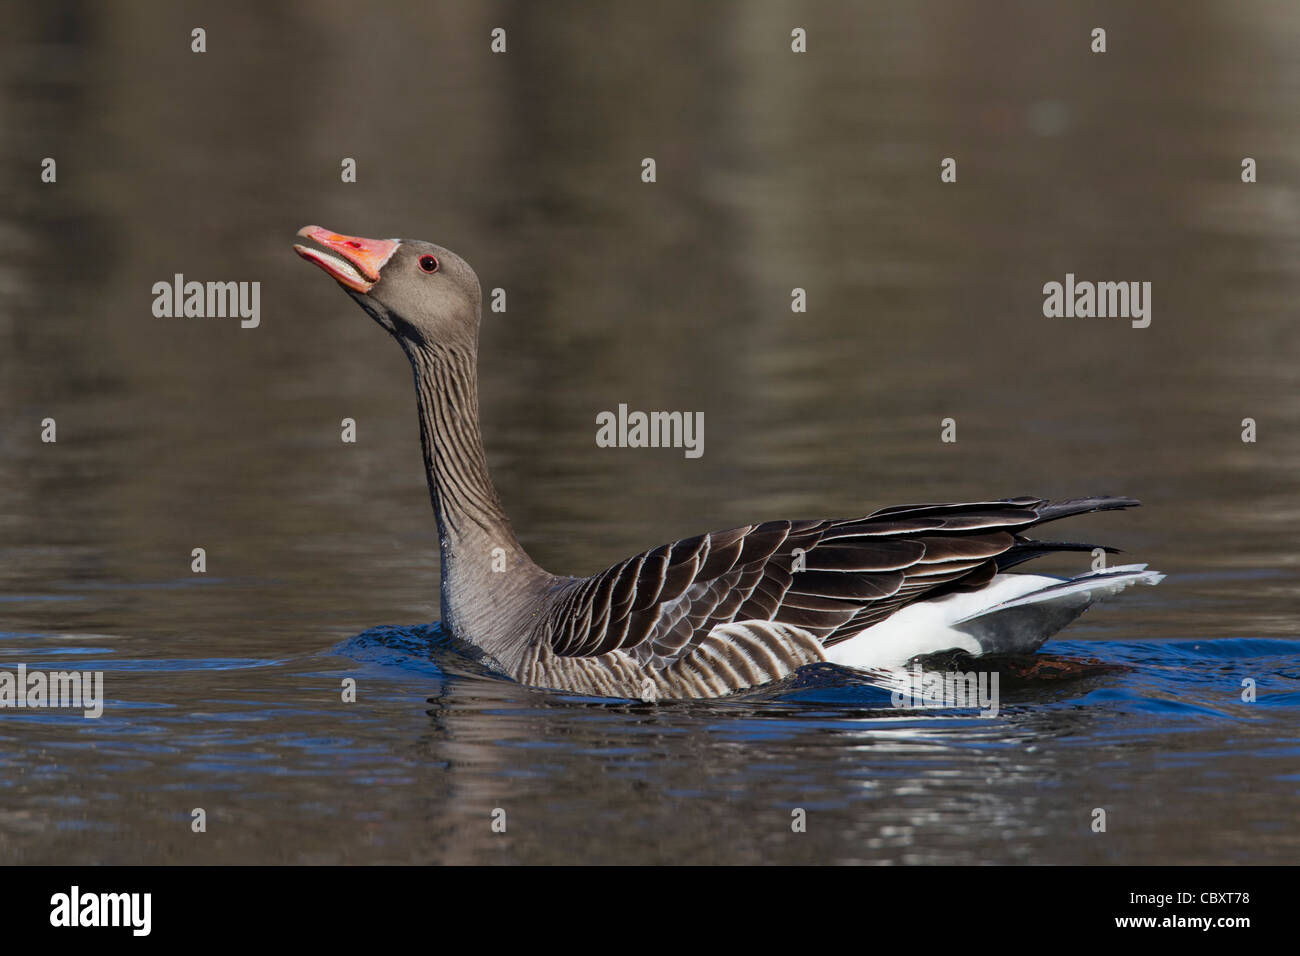 Greylag goose / graylag goose (Anser anser) showing aggressive display, Germany Stock Photo